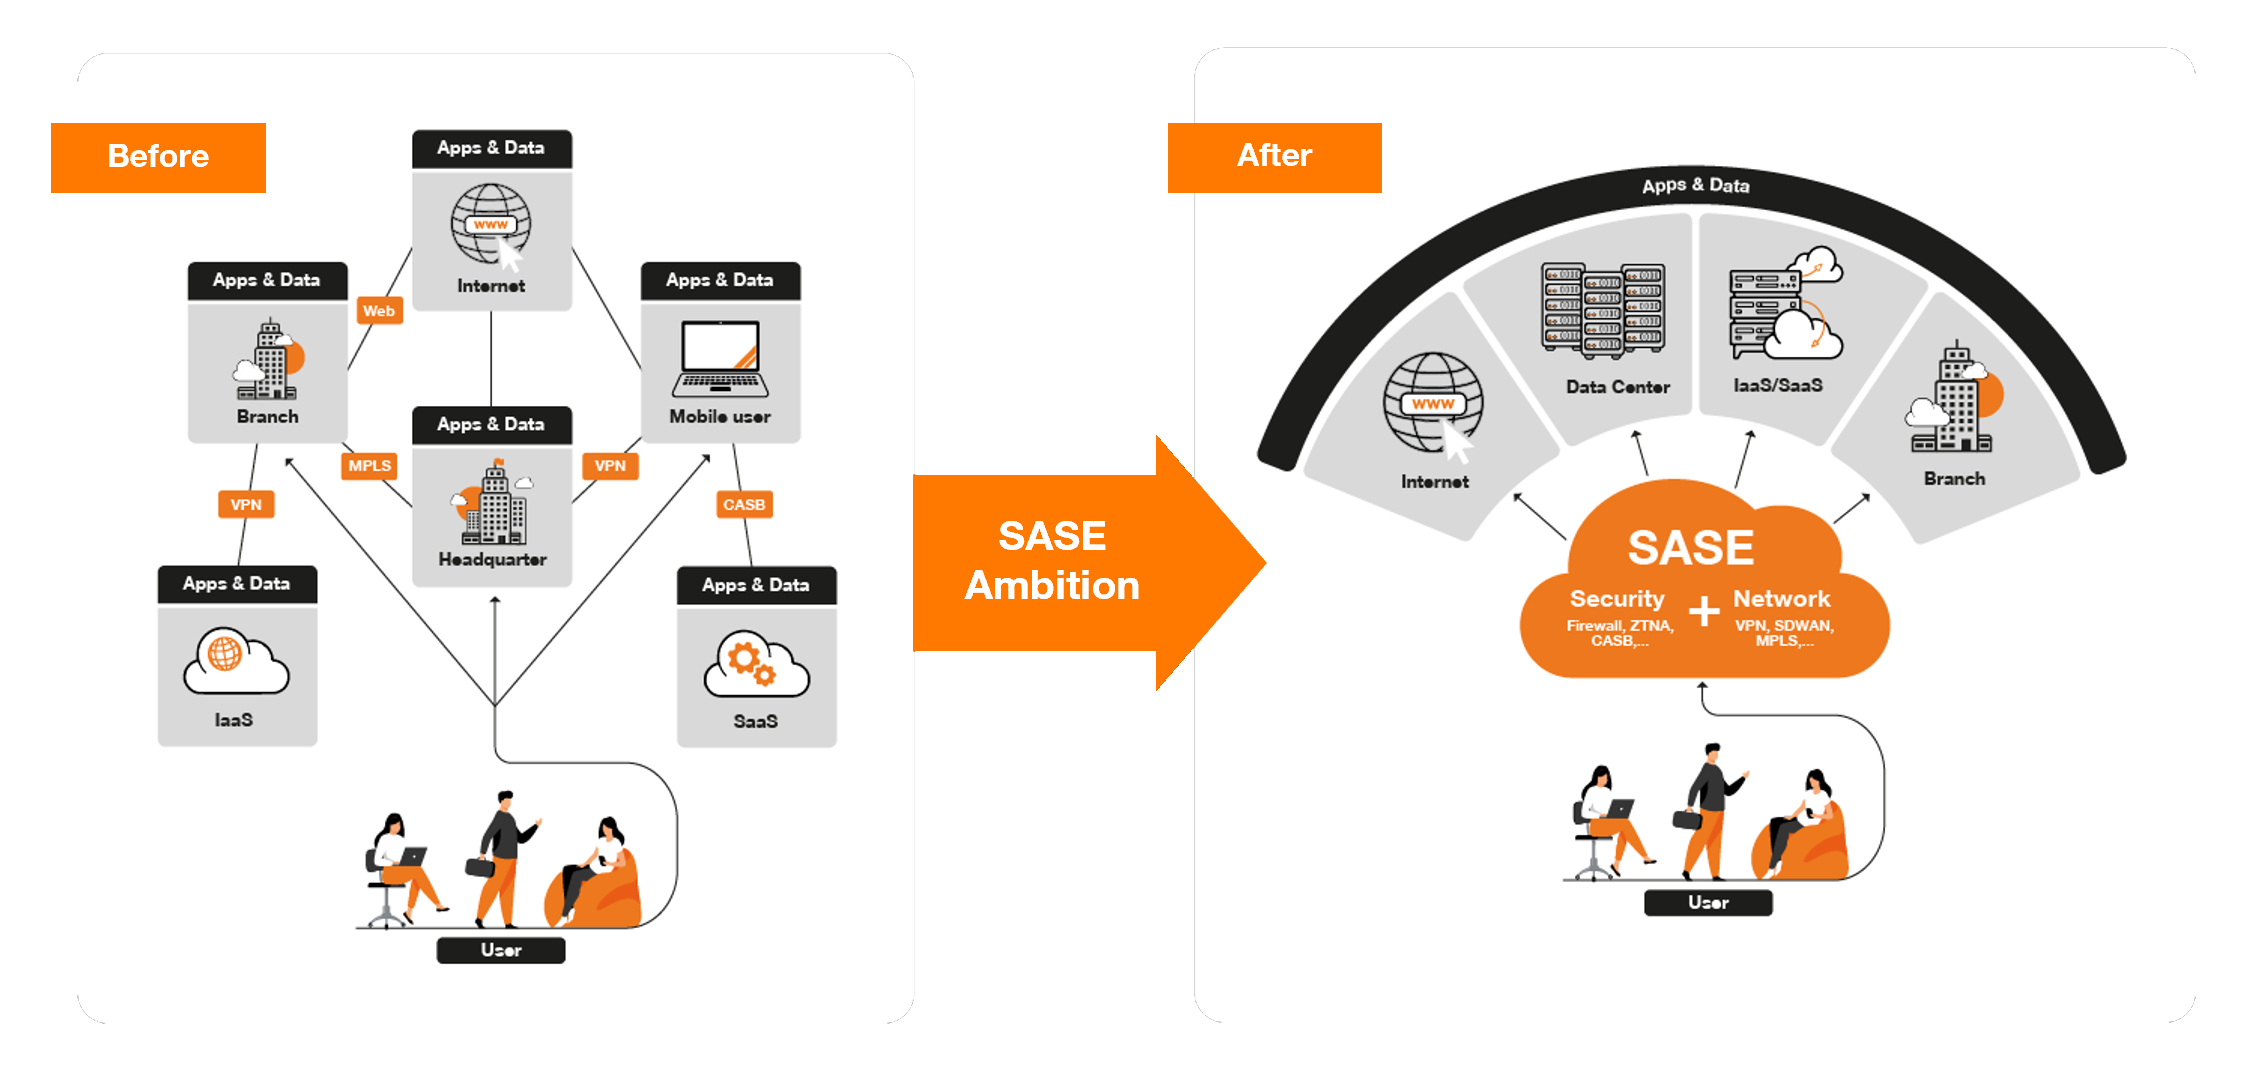 Before SASE, networks were complex with scattered configurations, whereas after SASE, a simplified and secure architecture provides seamless and flexible connectivity